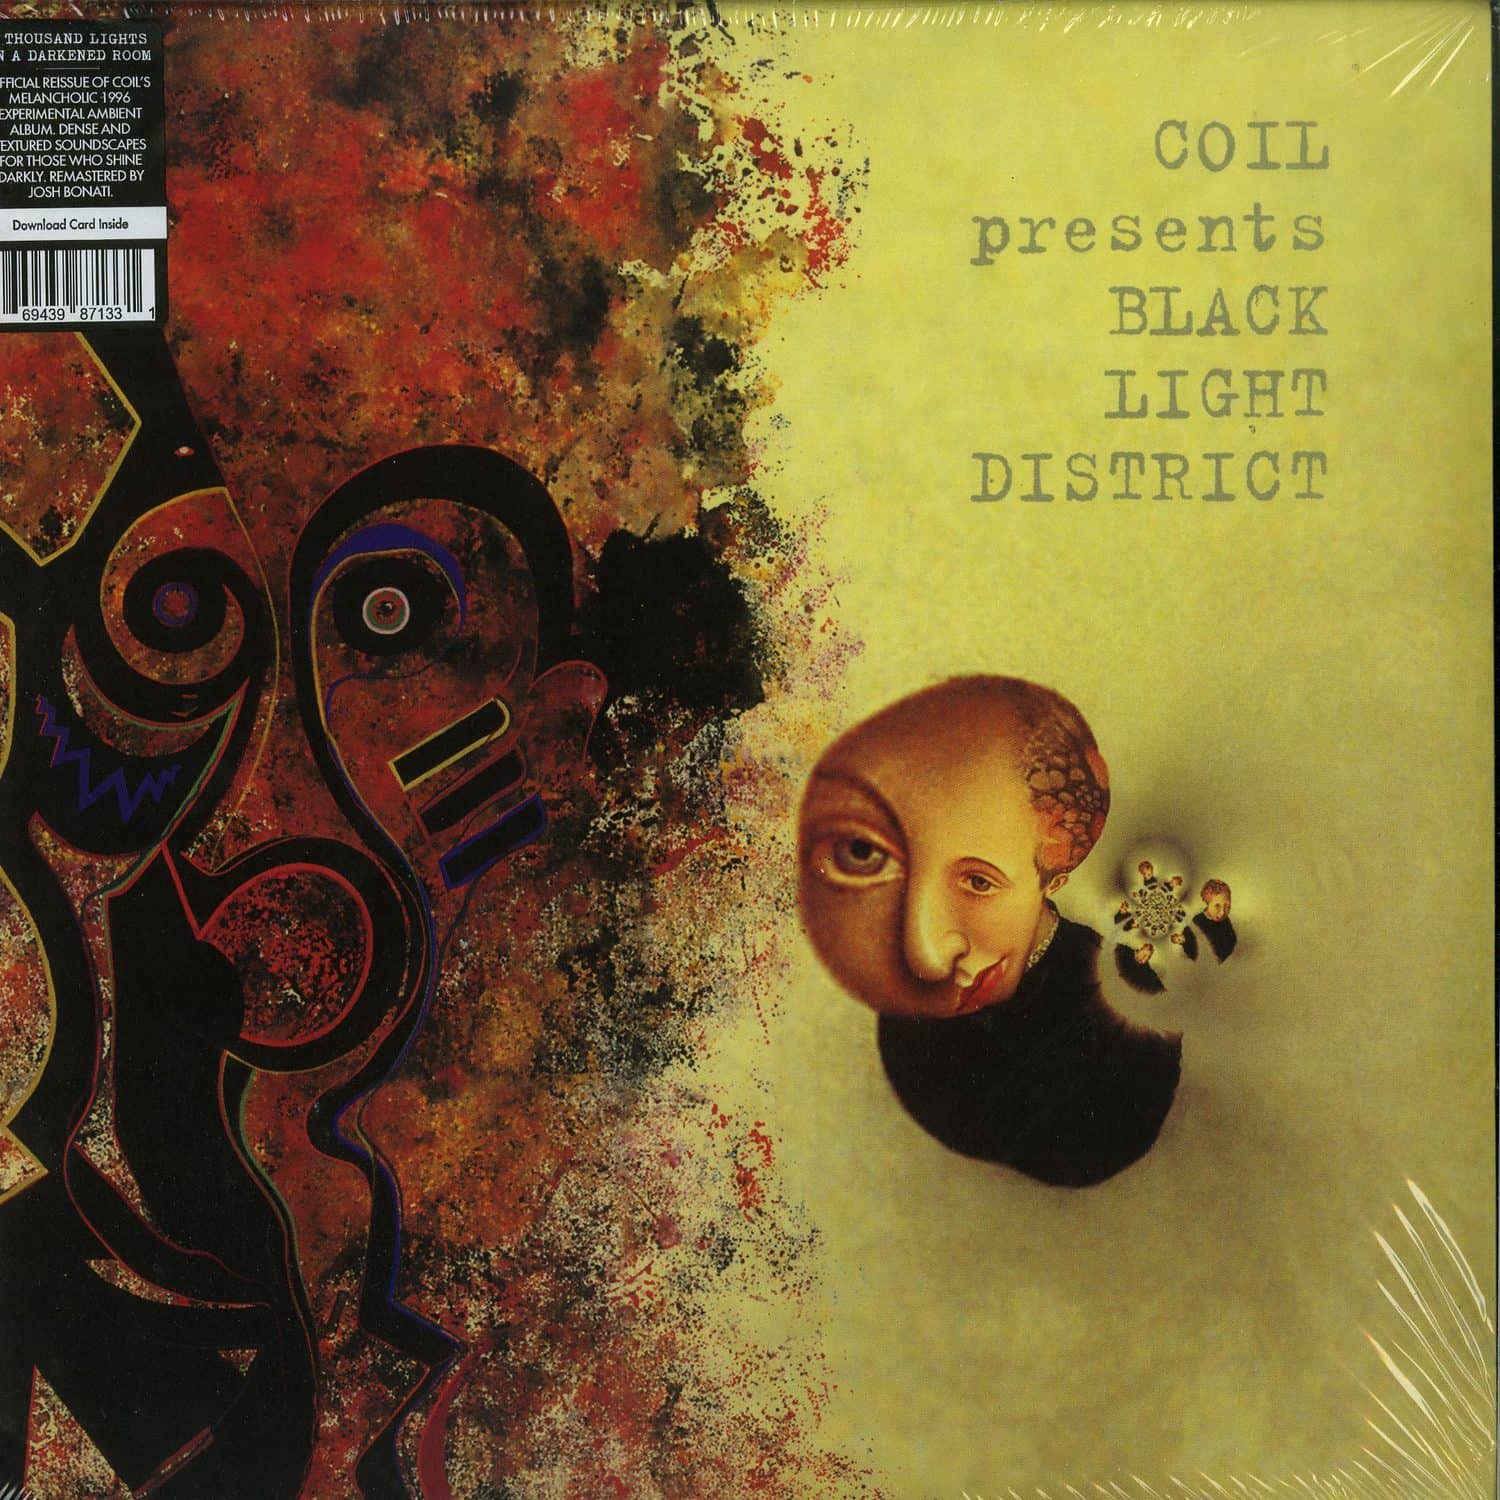 Coil pres. Black Light District - A THOUSAND LIGHTS IN A DARKENED ROOM 